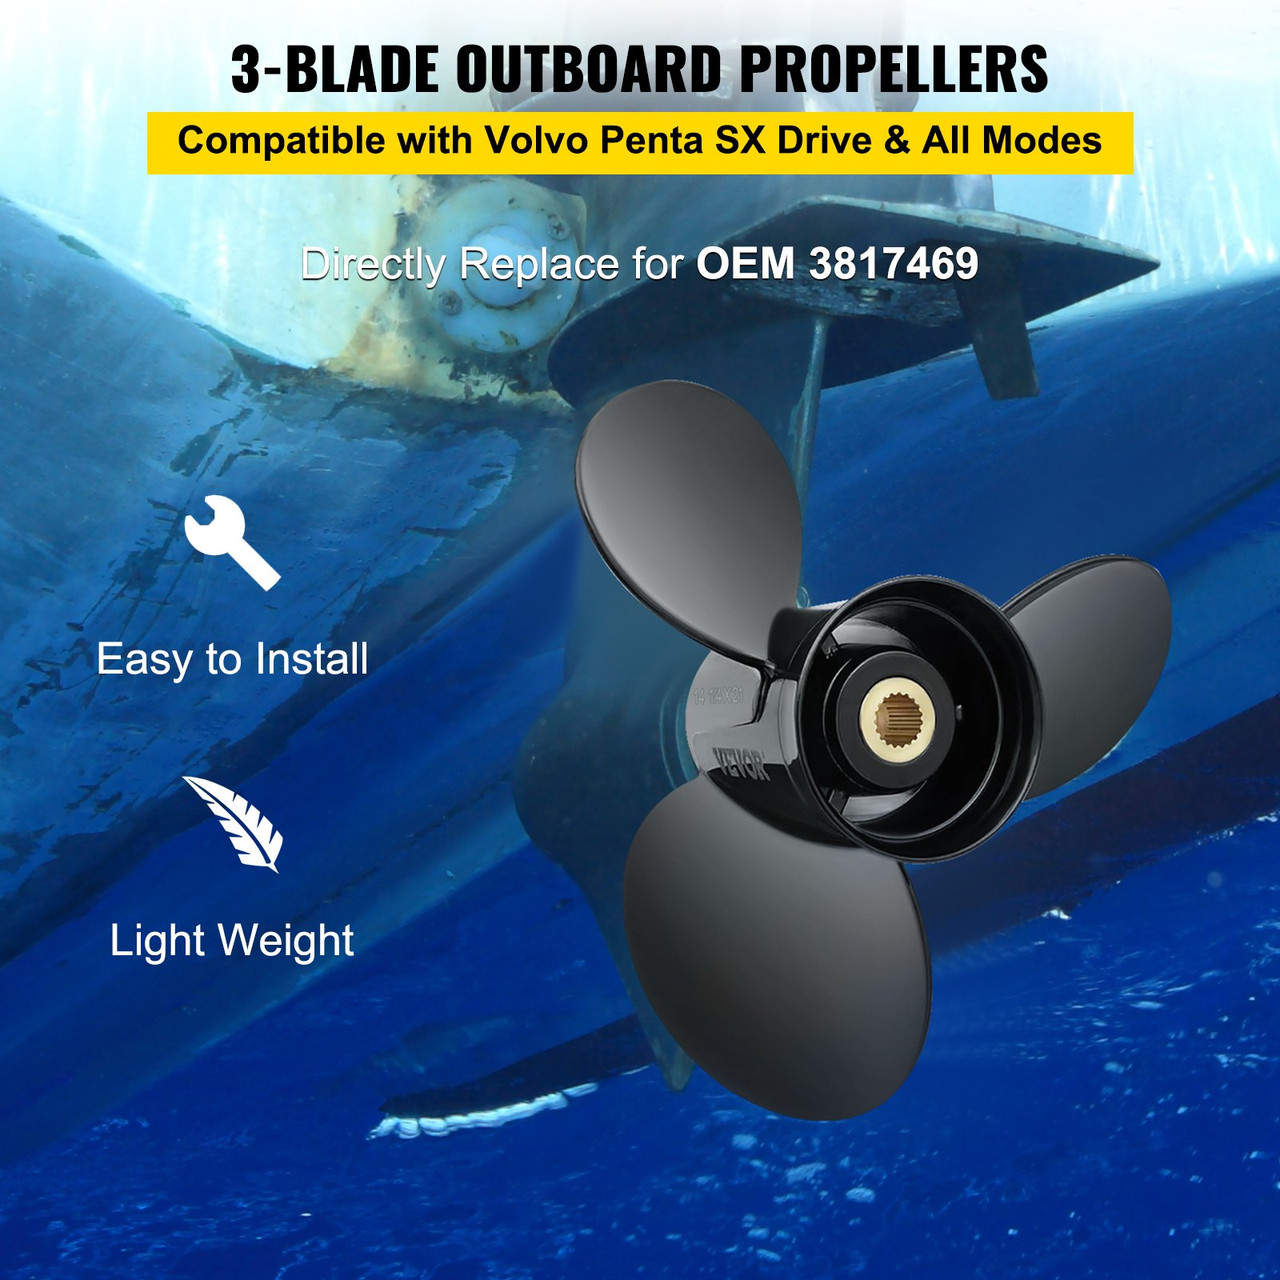 3817469 Outboard Propeller Boat Propeller 3-Blade 14 1/4 Diam. x 21" Pitch